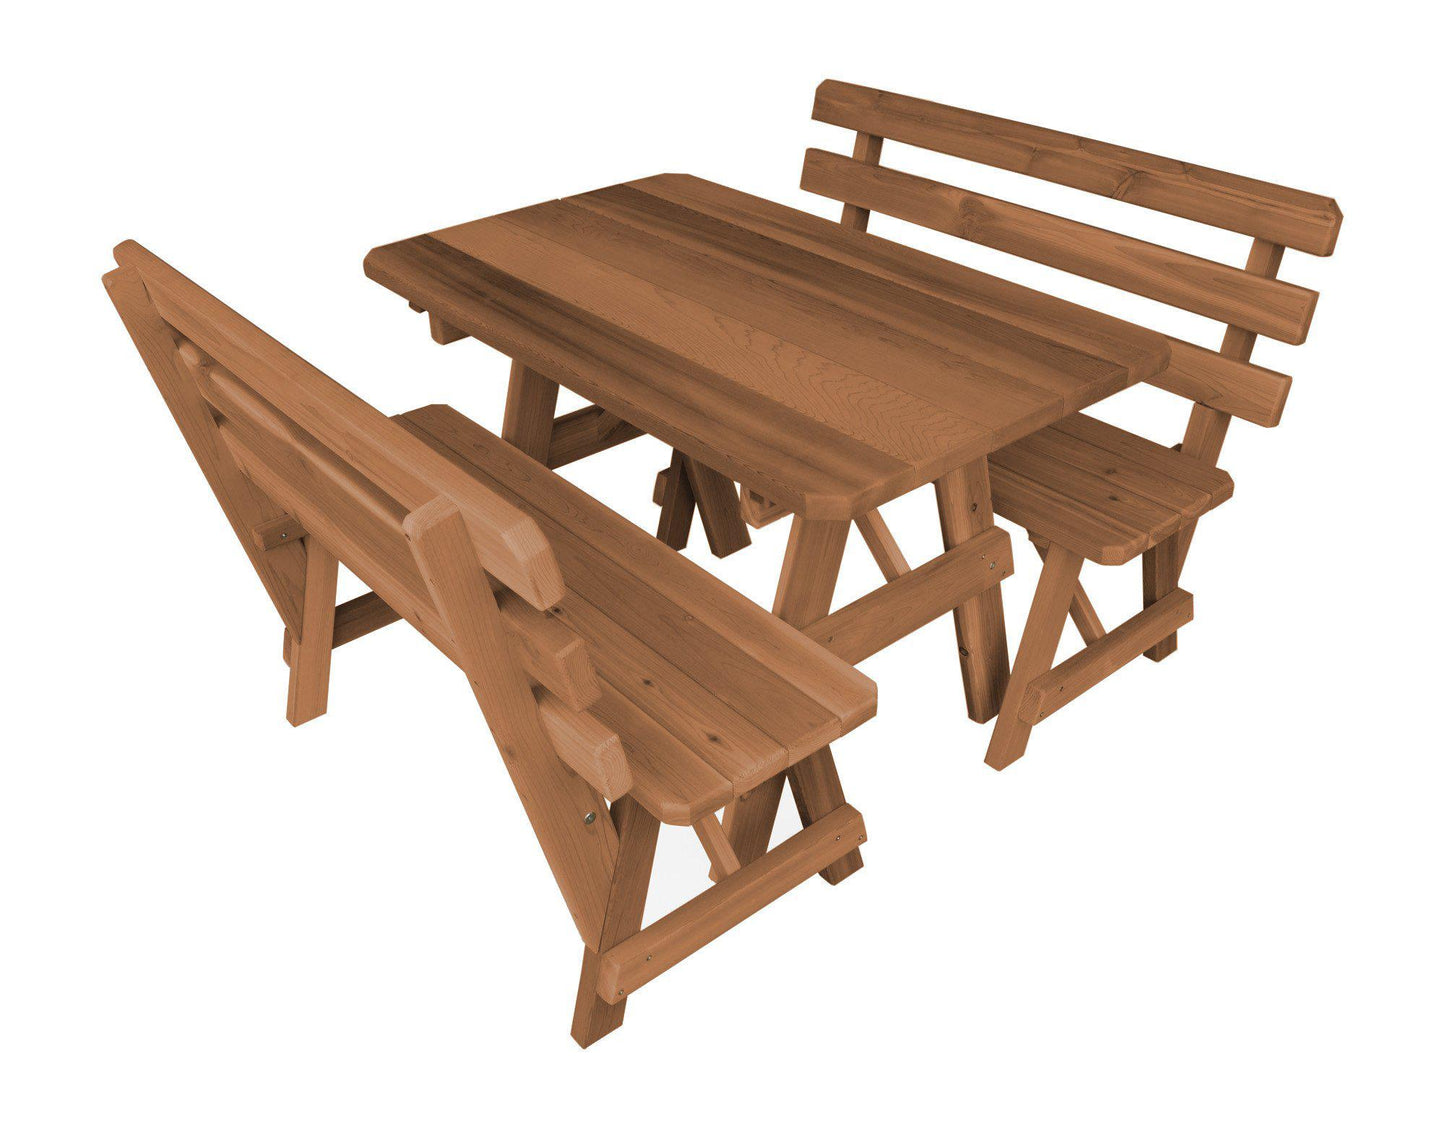 Regallion Outdoor Western Red Cedar 94" Table w/2 Backed Benches - LEAD TIME TO SHIP 2 WEEKS